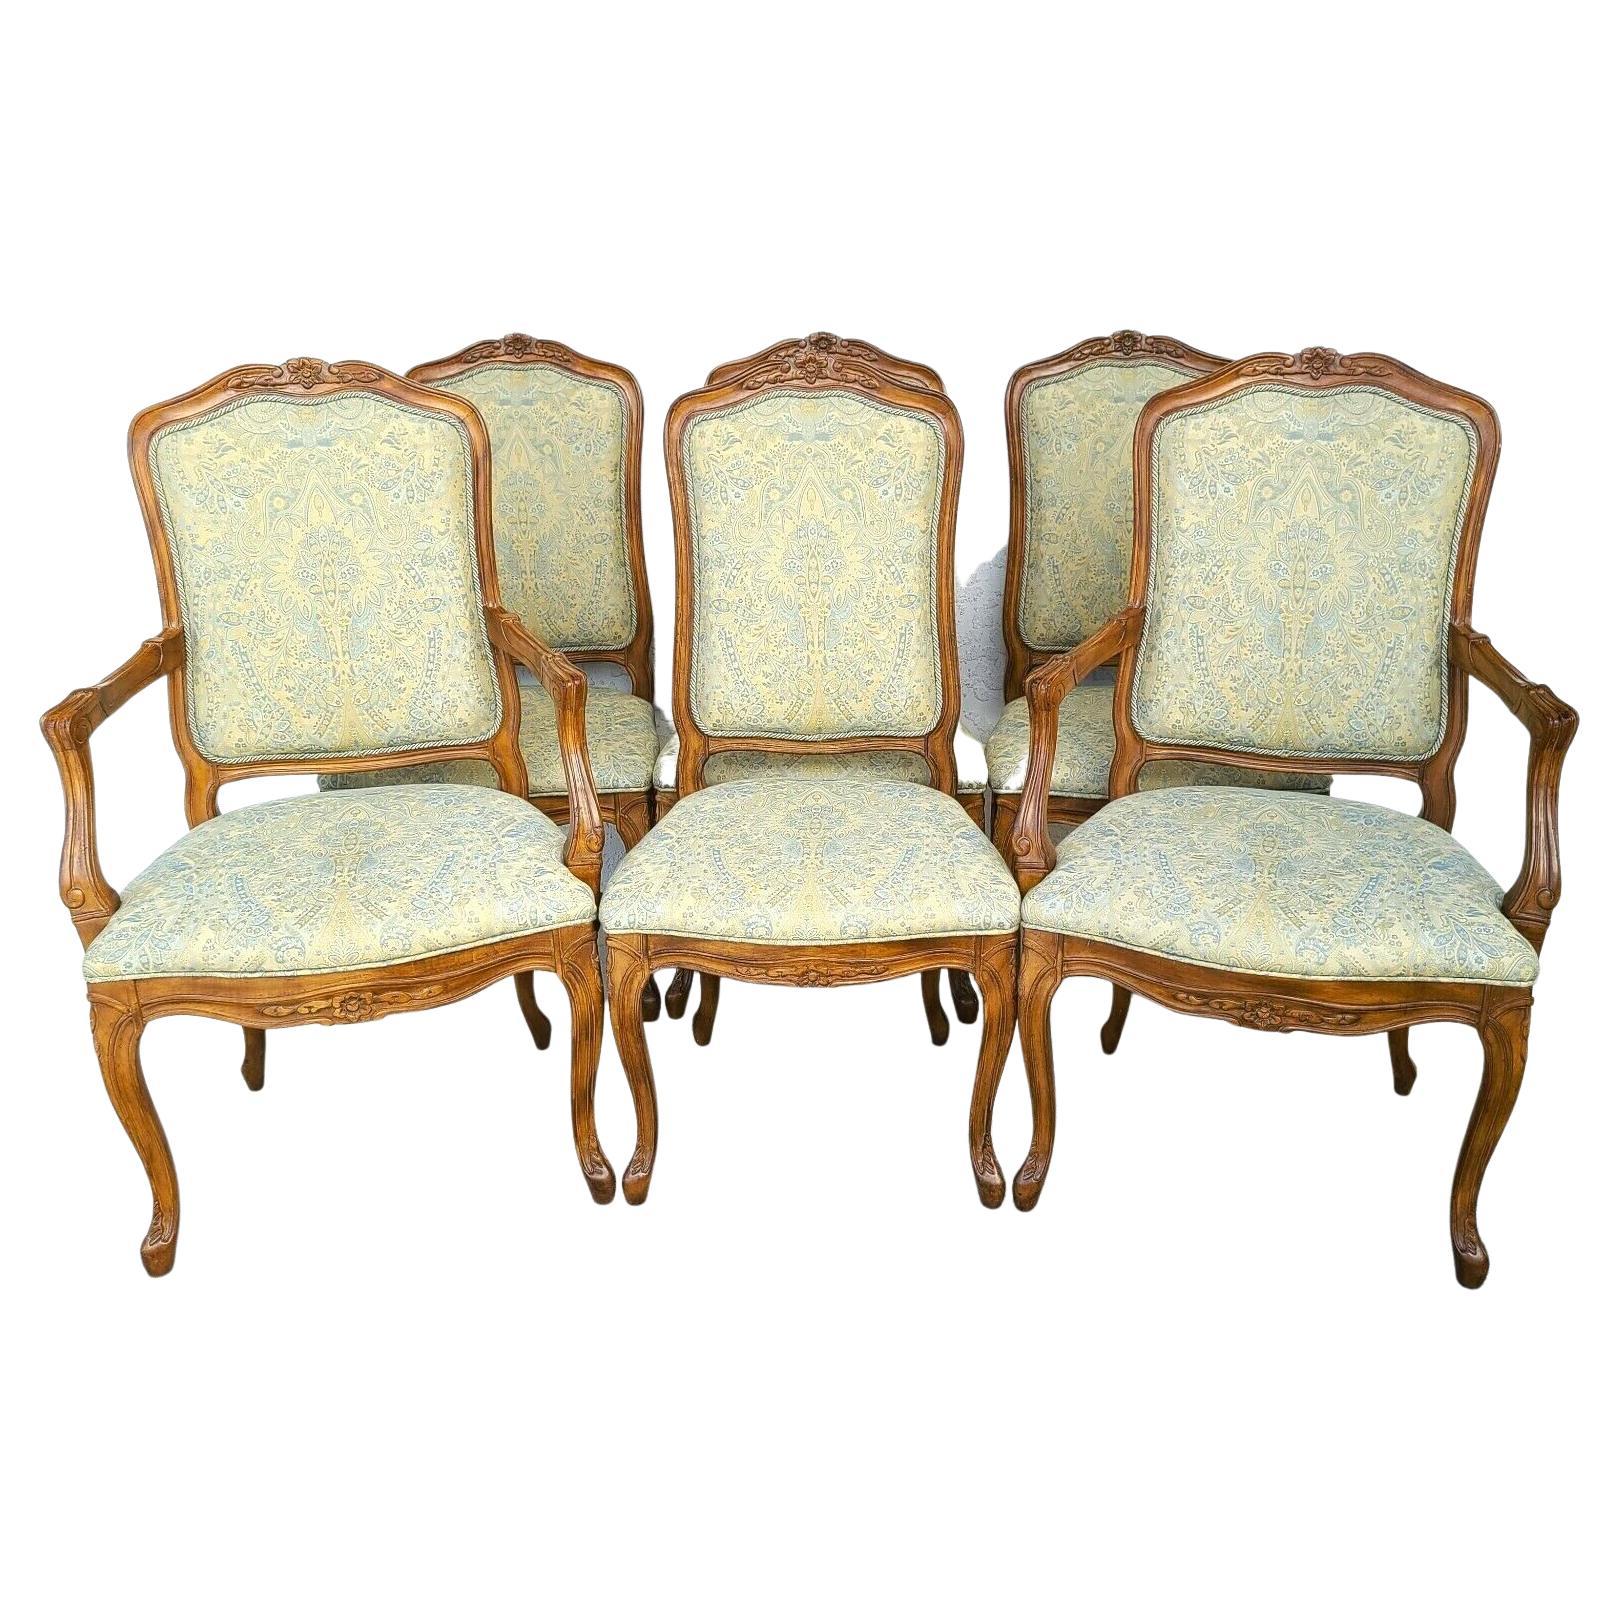 French Provincial Louis XV Dining Chairs, Set of 6